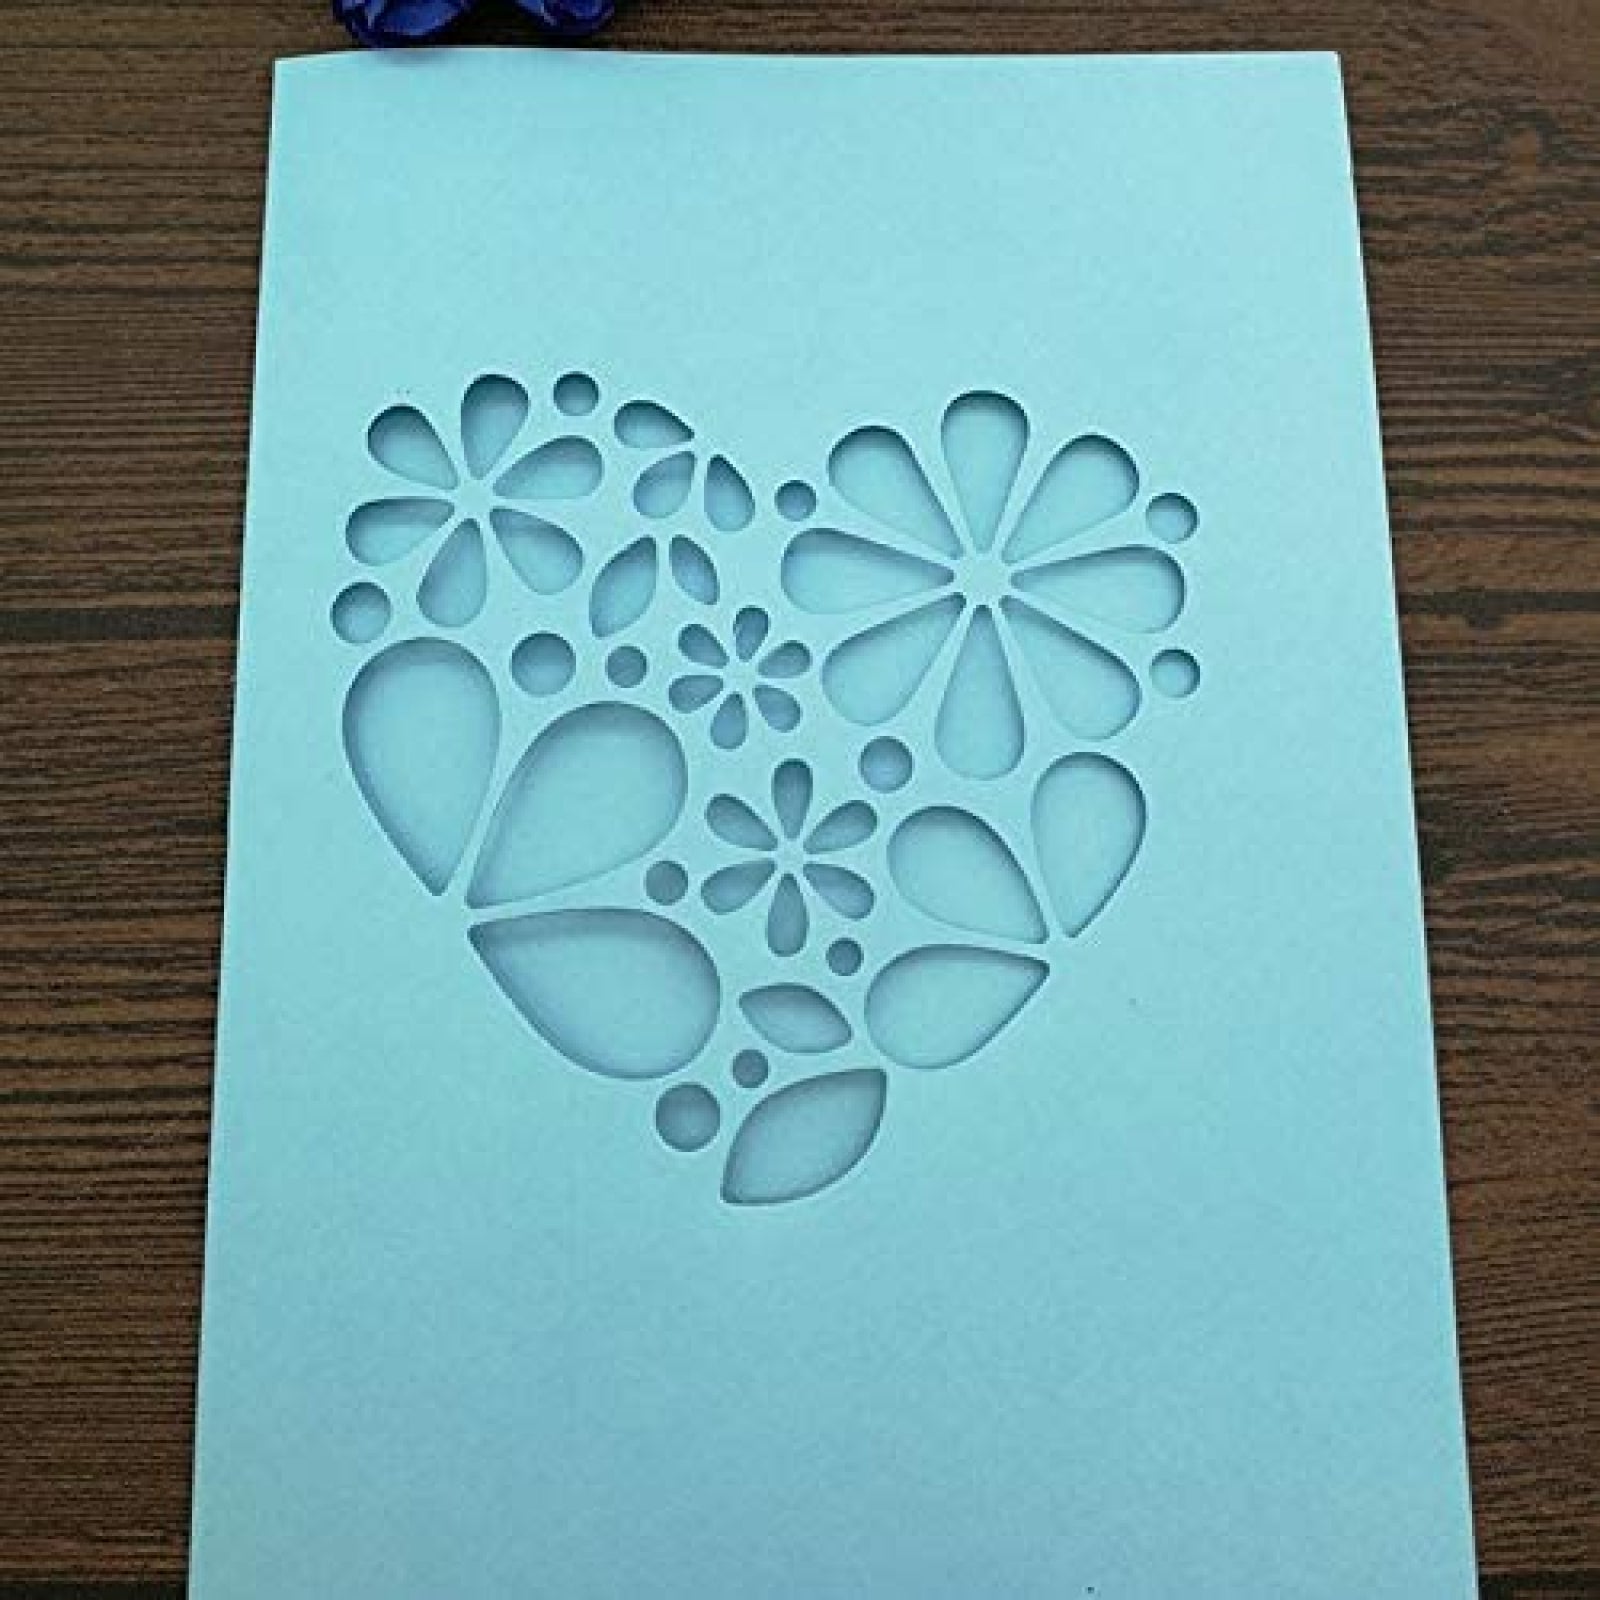 Cutout Flowers Within a Heart Cutting Die